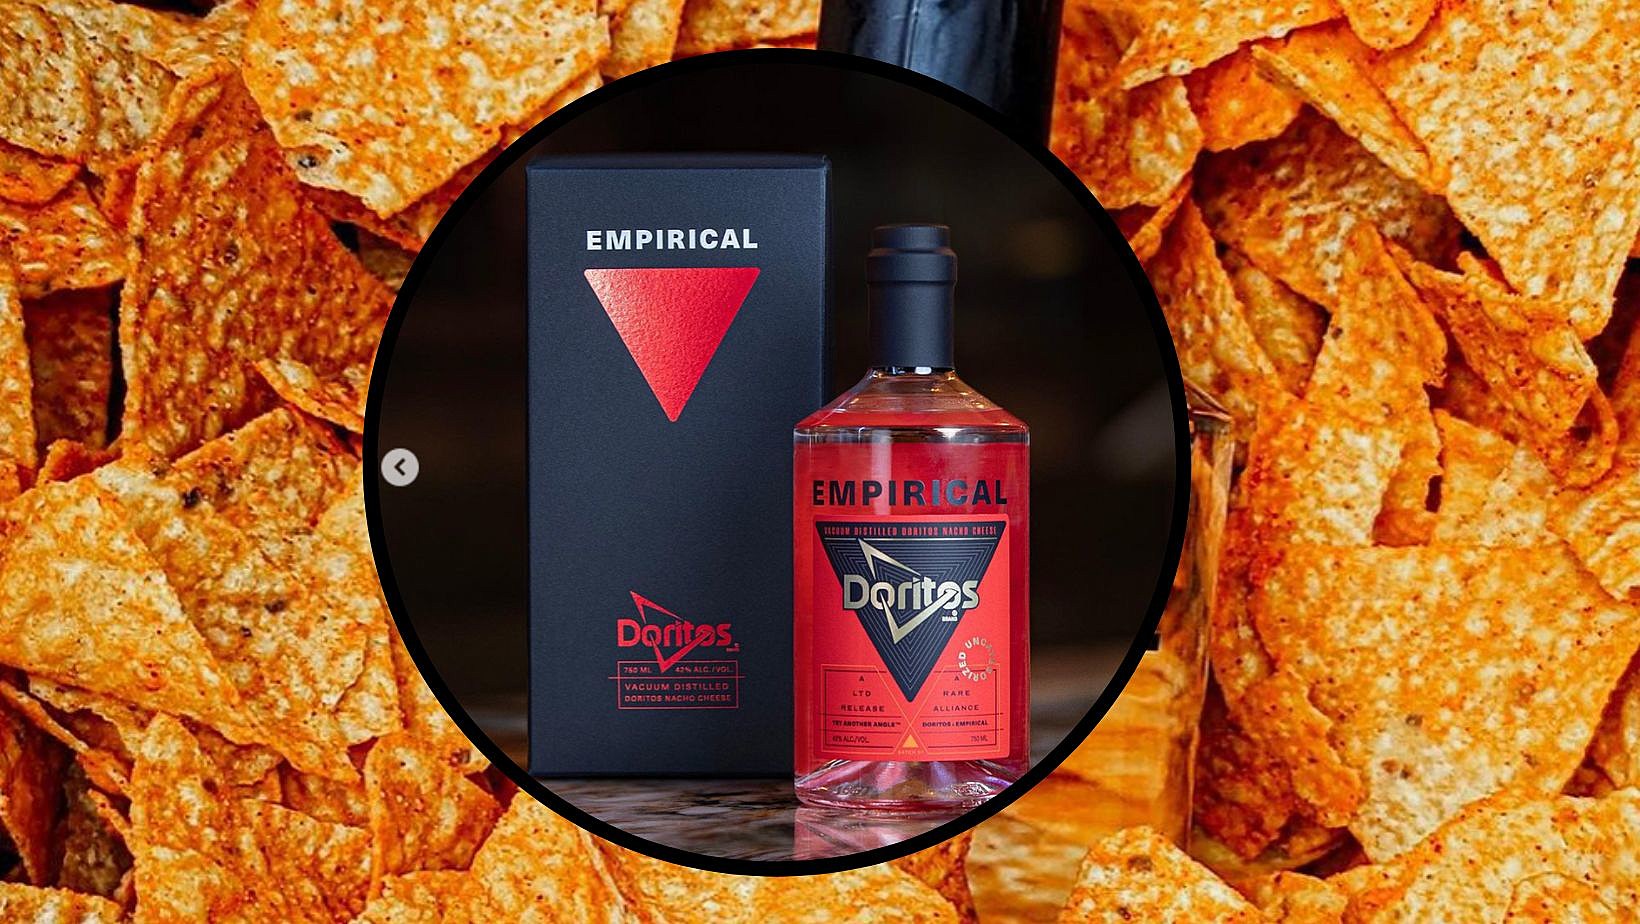 Doritos Liquor Is Actually Real! Would You Try It?